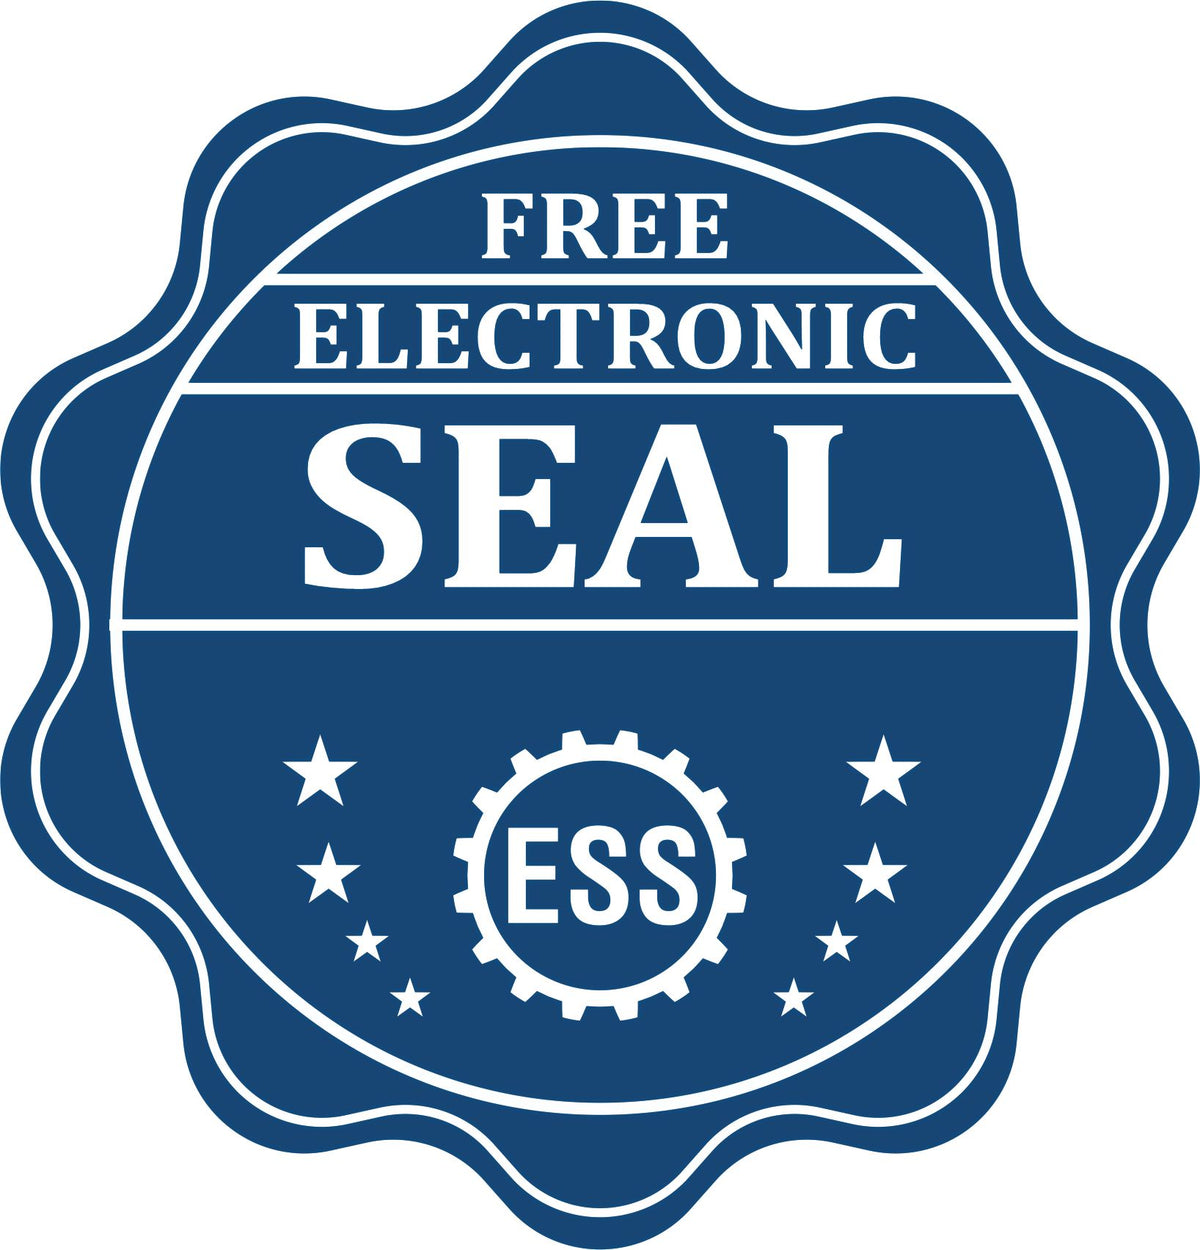 A badge showing a free electronic seal for the Slim Pre-Inked Mississippi Professional Engineer Seal Stamp with stars and the ESS gear on the emblem.